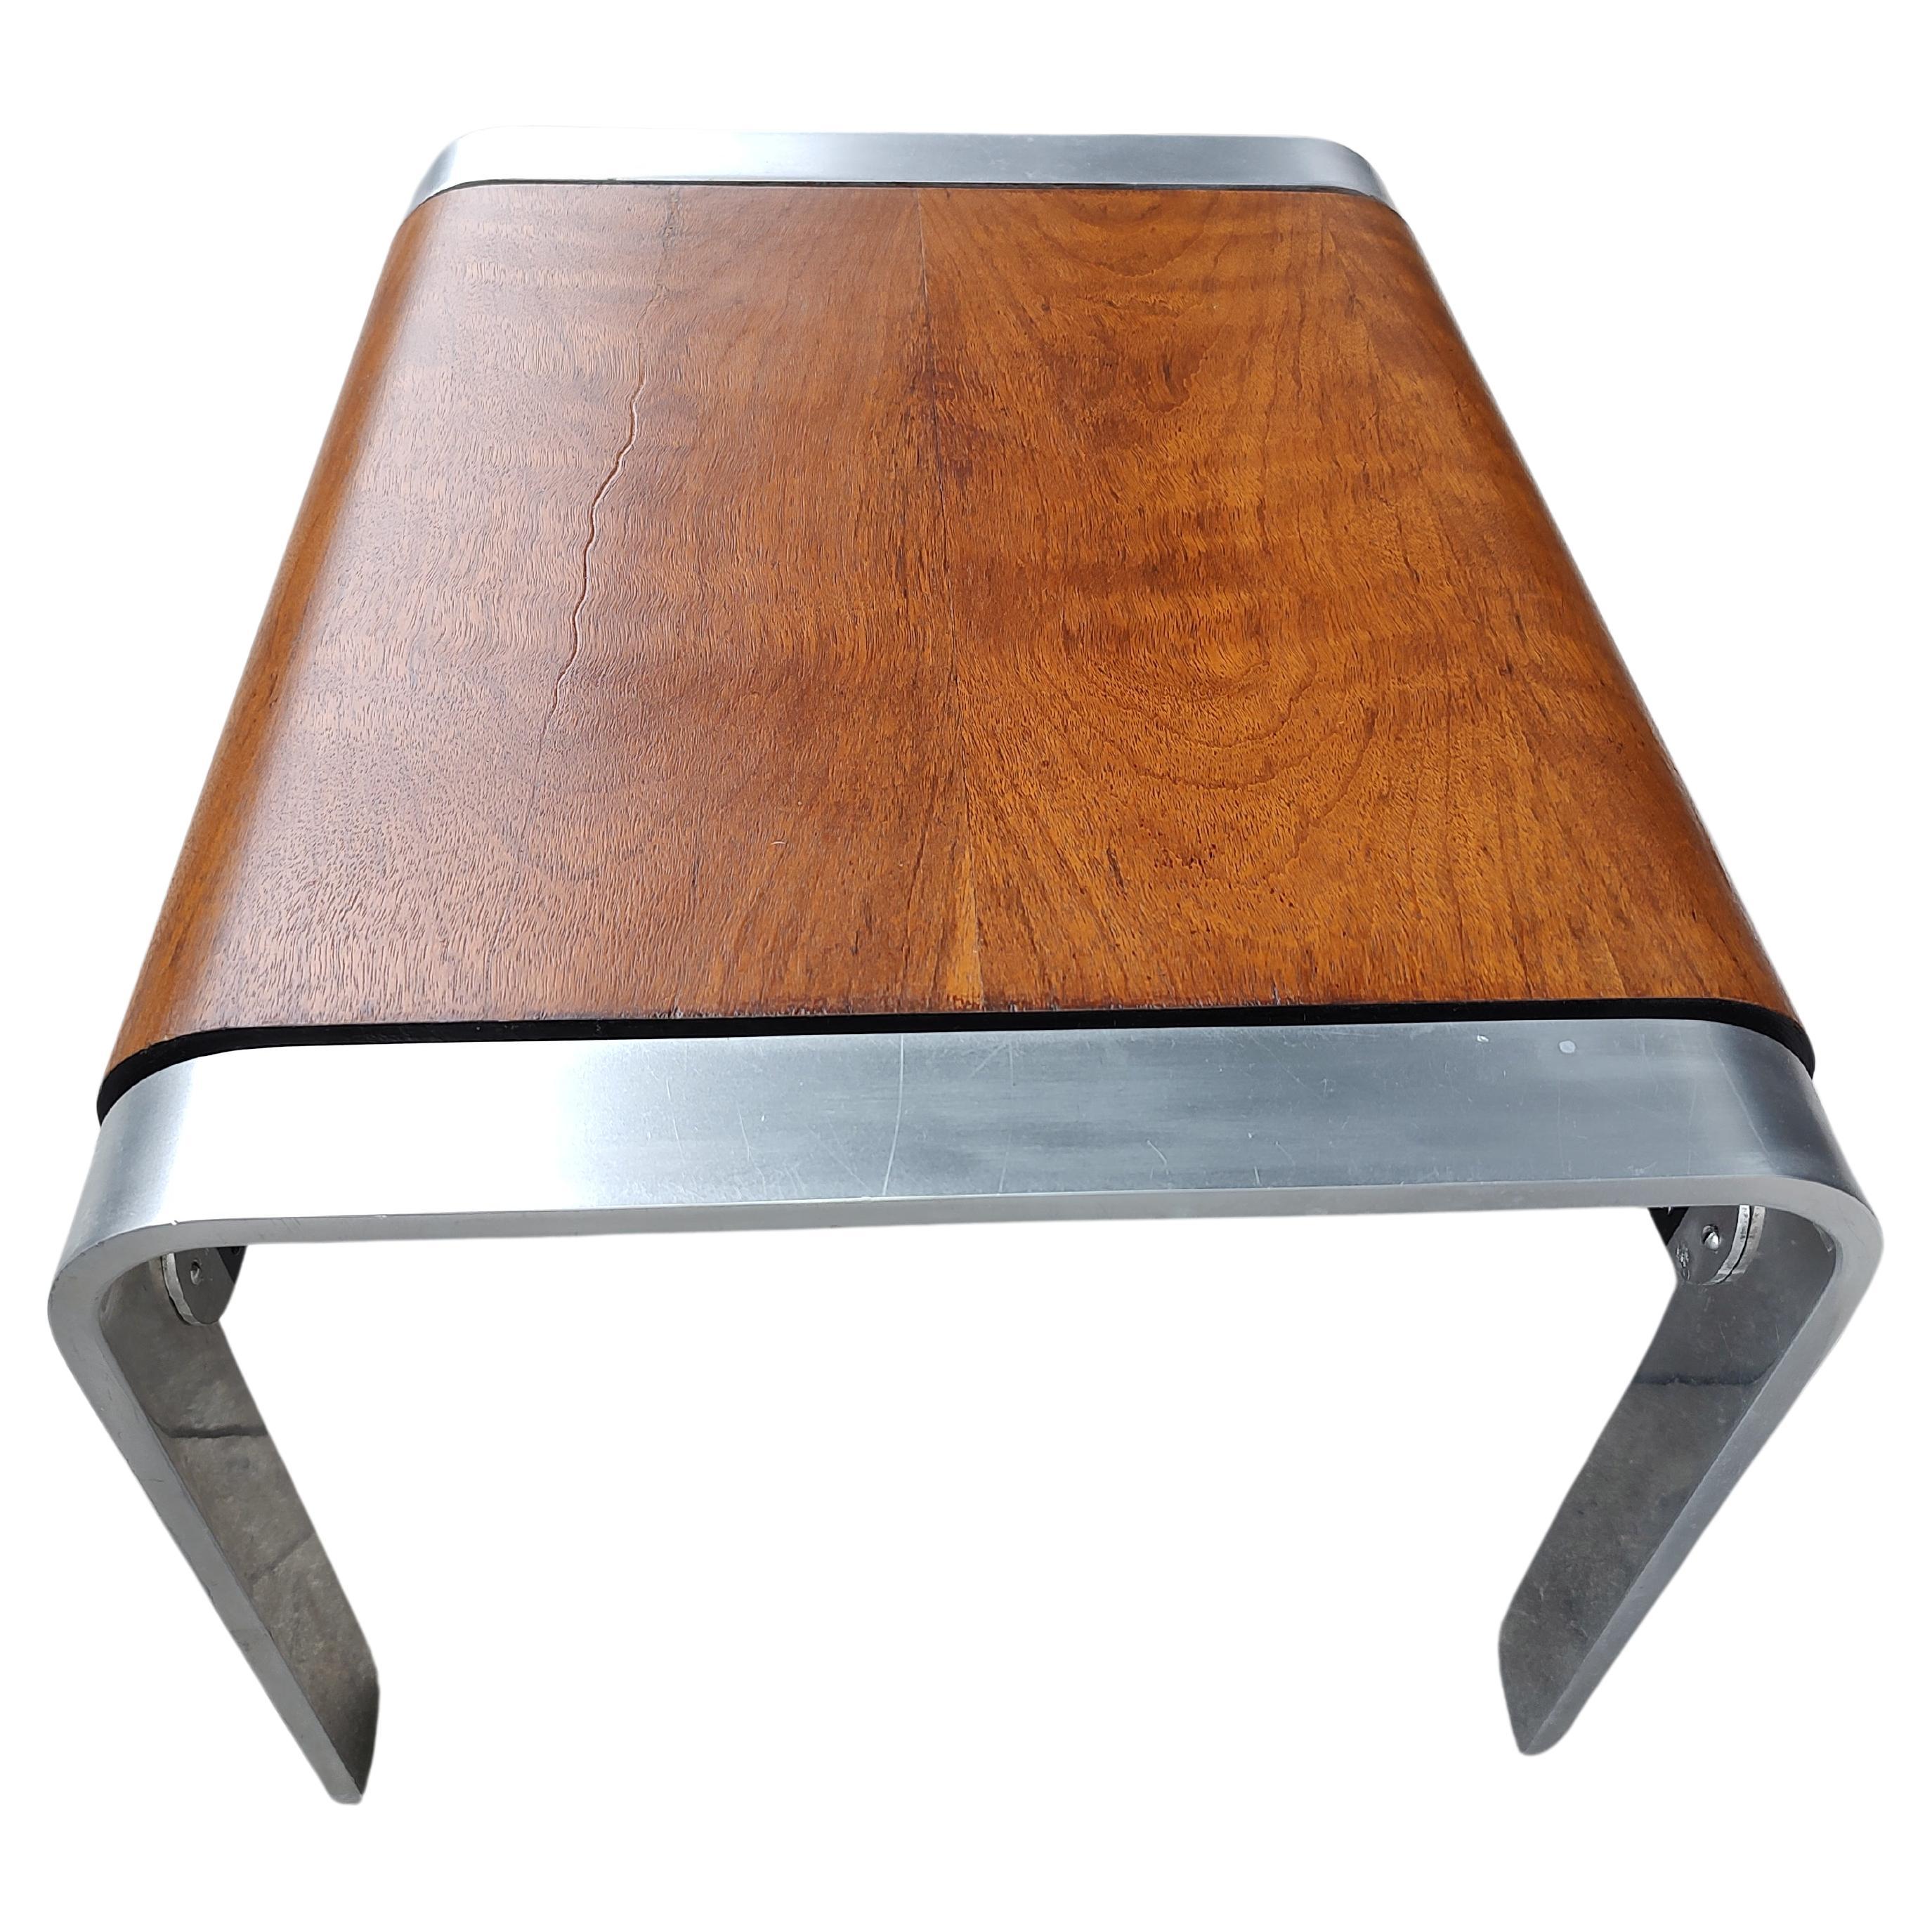 American Modernist Aluminum Side Table with a Exotic Bent Wood Table Top For Sale